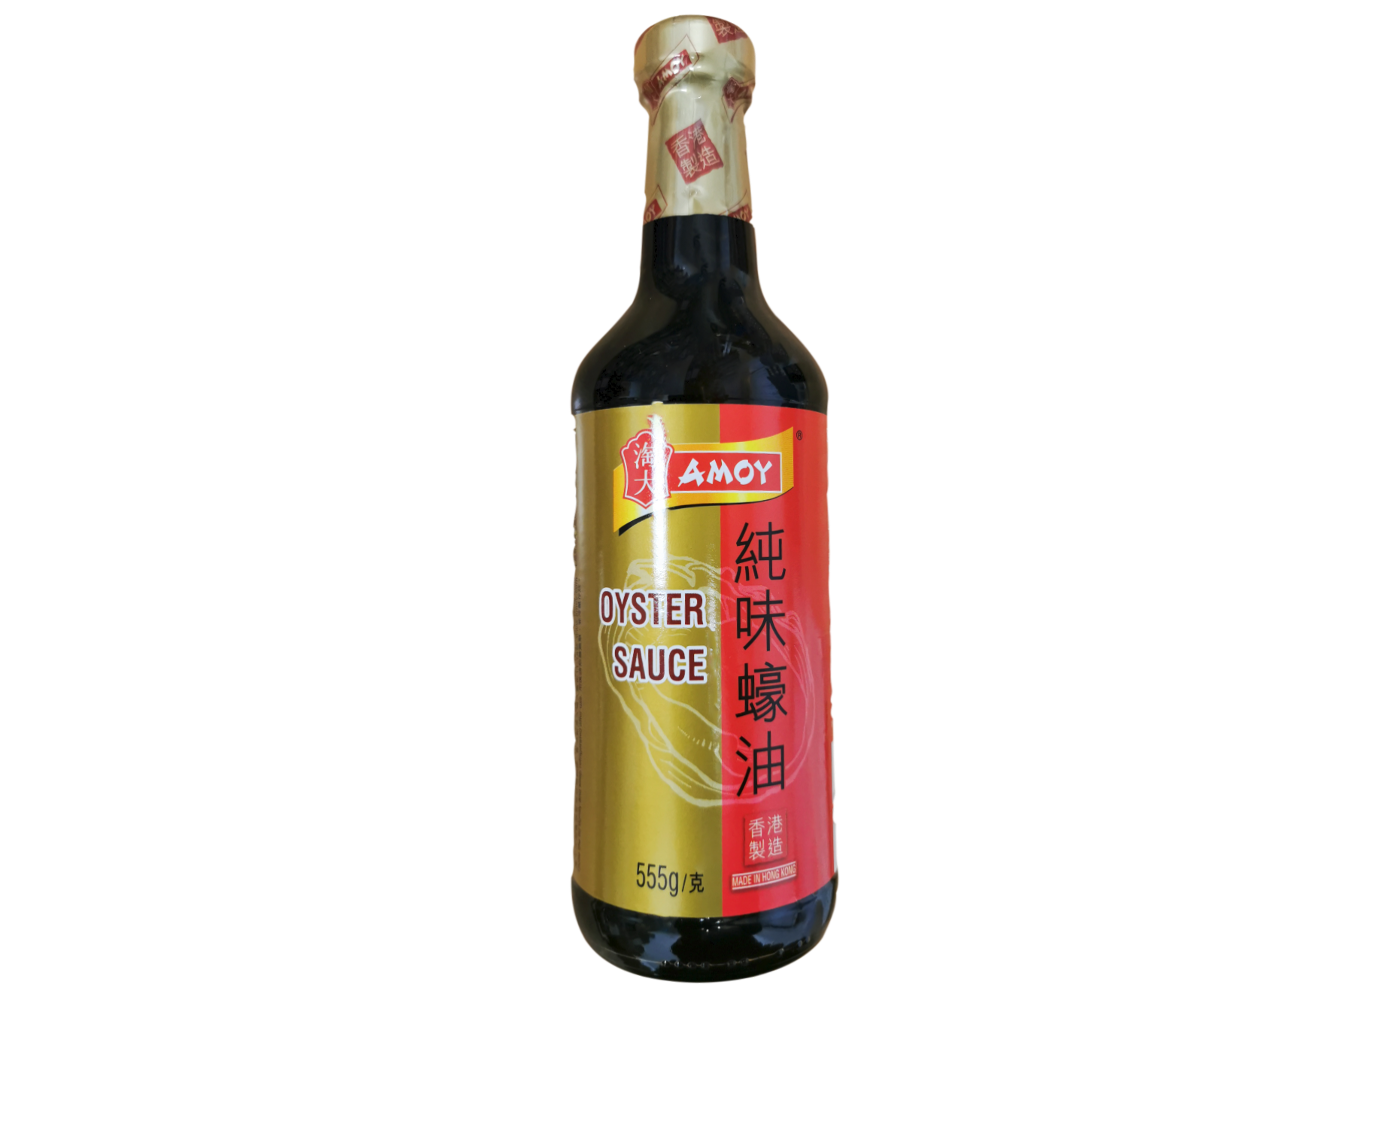 Amoy Oyster Sauce